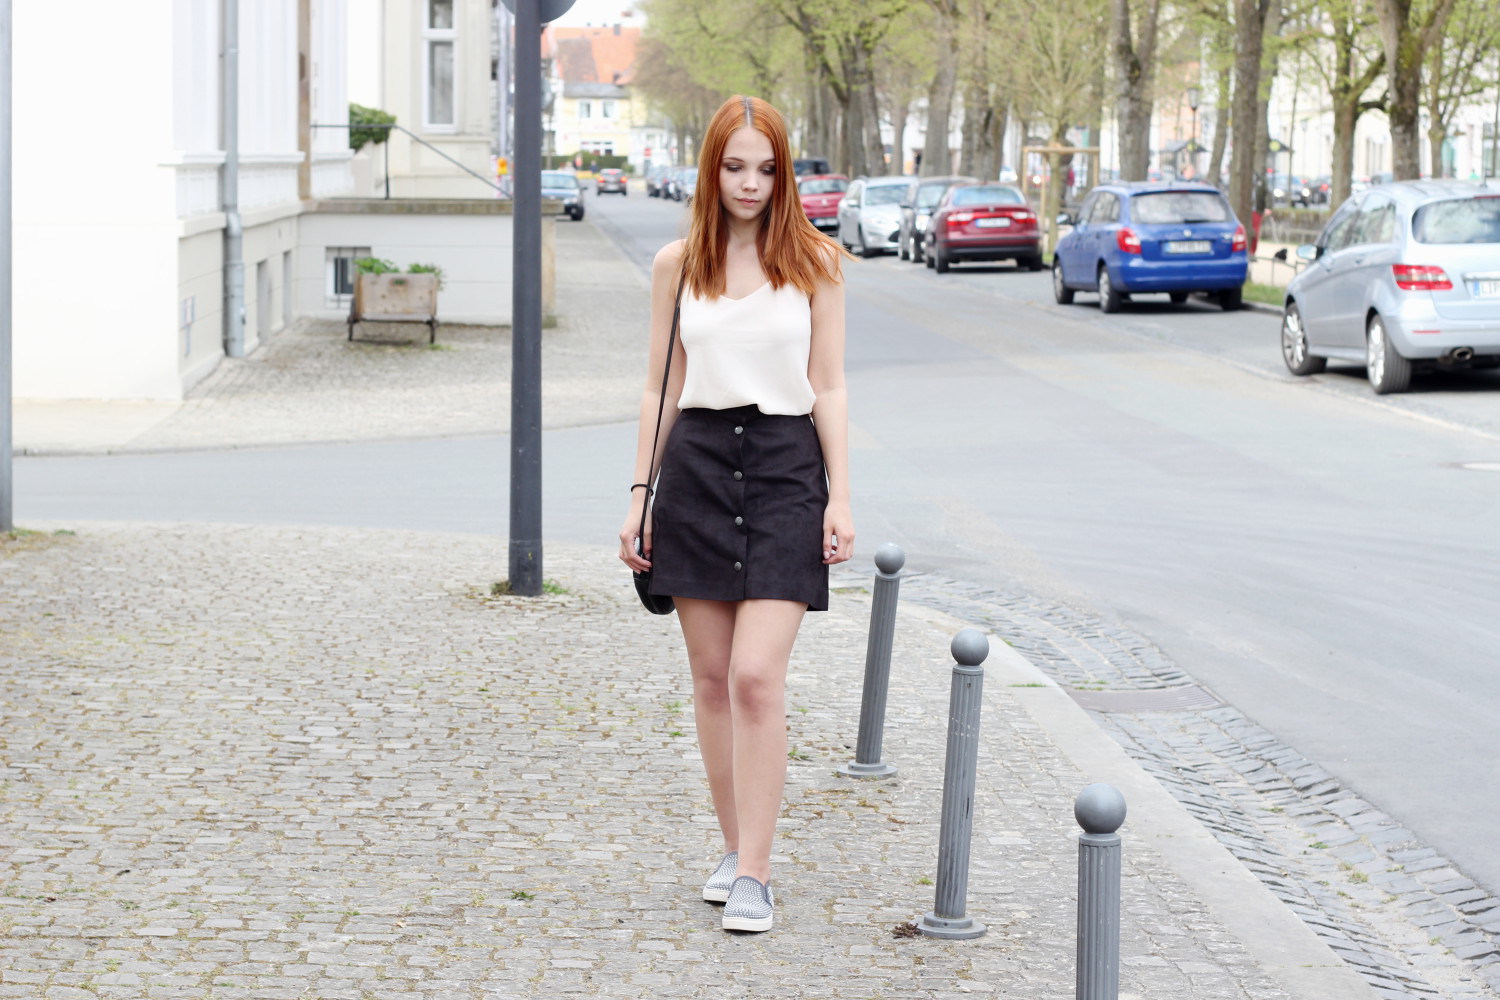 bezaubernde nana, fashionblog, germany, outfit, streetstyle, about you outfit, new look nude chiffon top, wildleder rock 70er style edited the label, steve madden slipper grau mit nieten, runde ledertasche